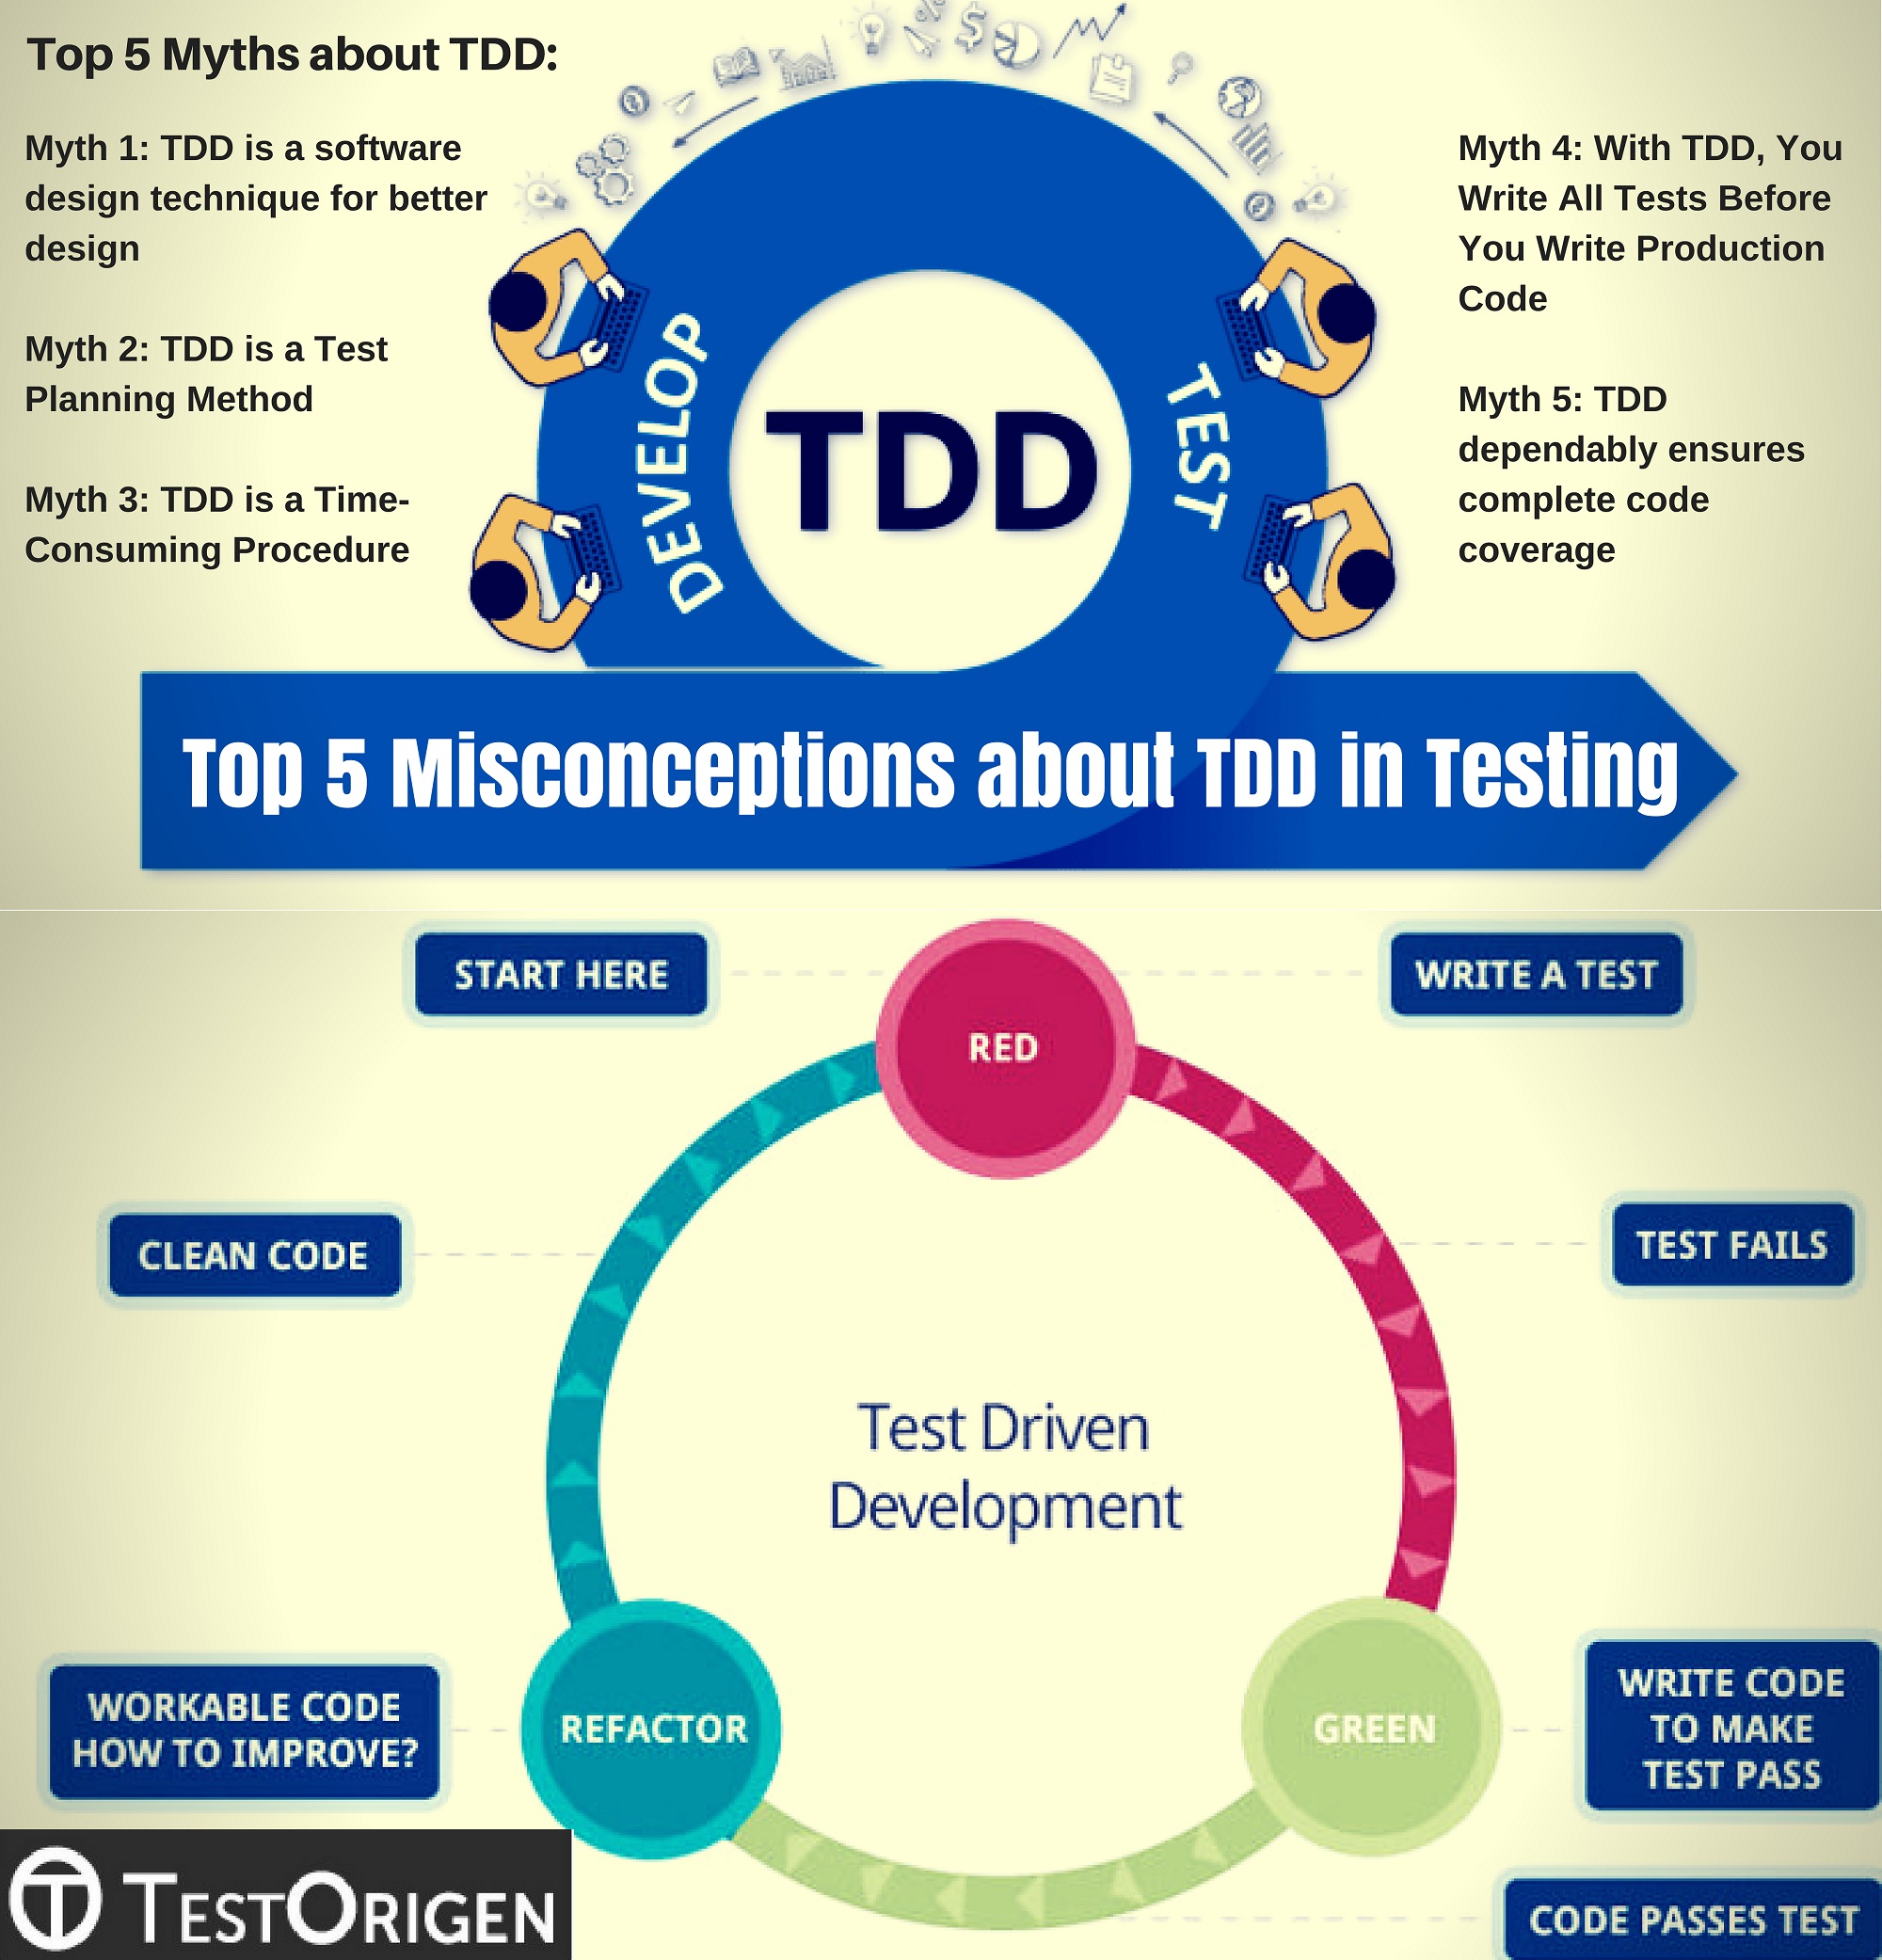 Top 5 Misconceptions about TDD in Testing